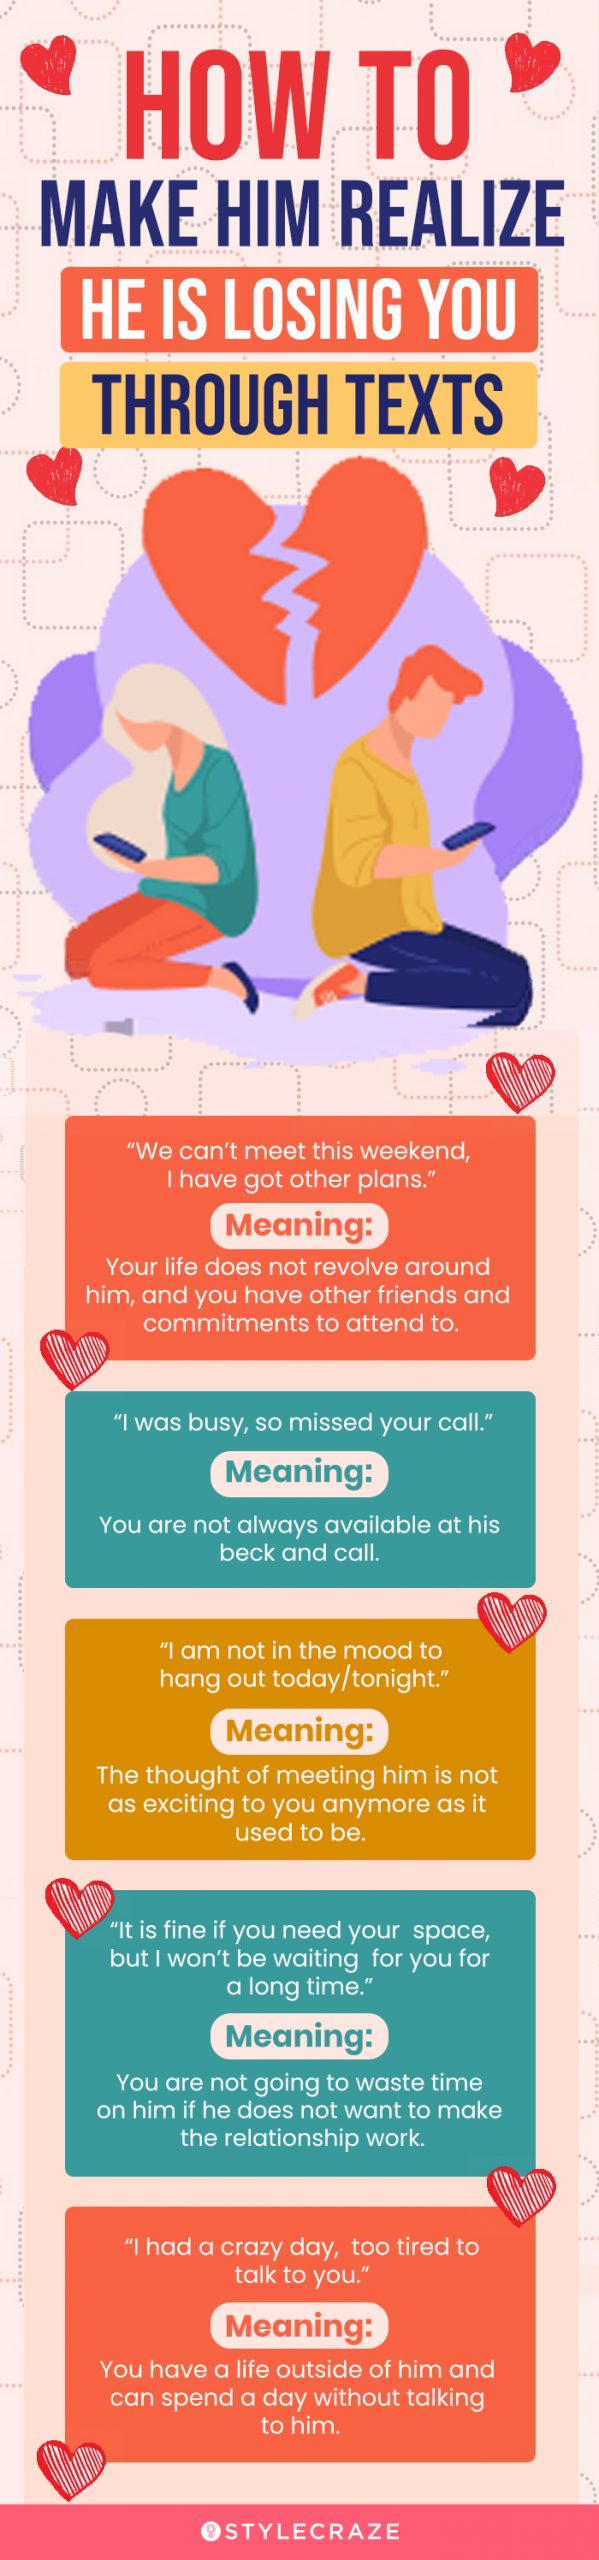 he is losing you throught text [infographic]